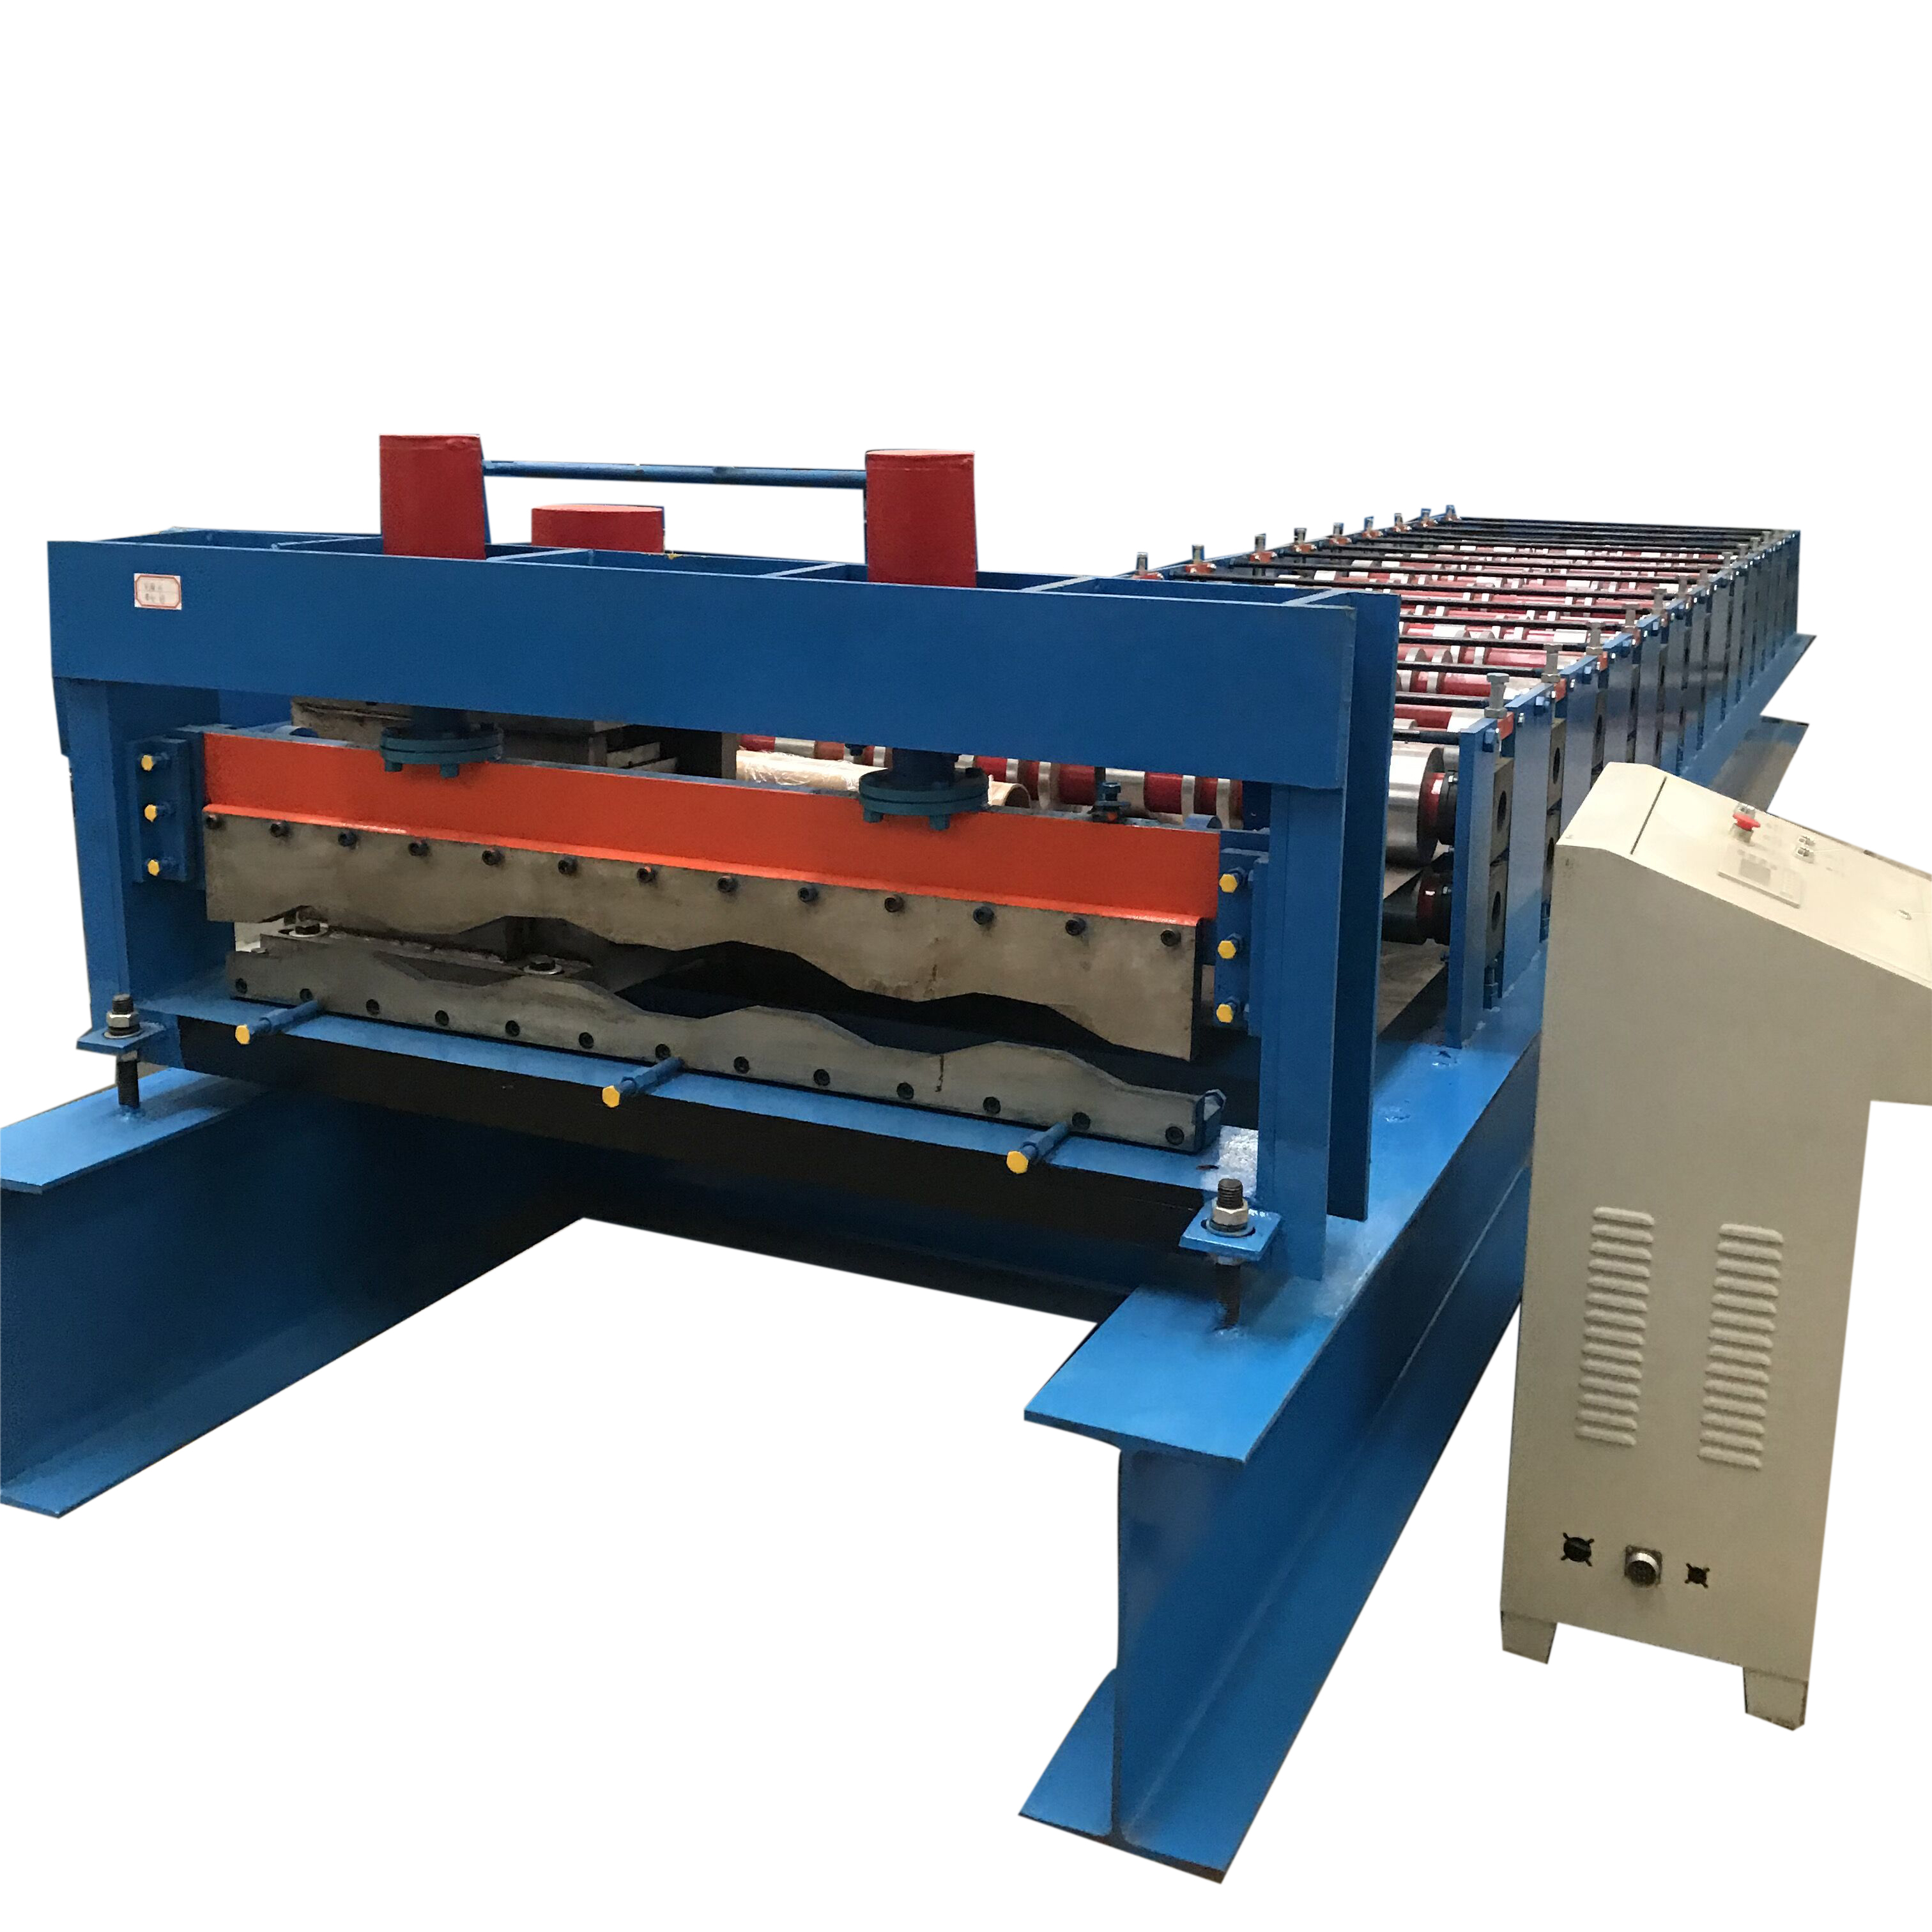 Global Cold Forming Machines Market Analysis Report 2023-2031 | 115 Pages Report  - Benzinga